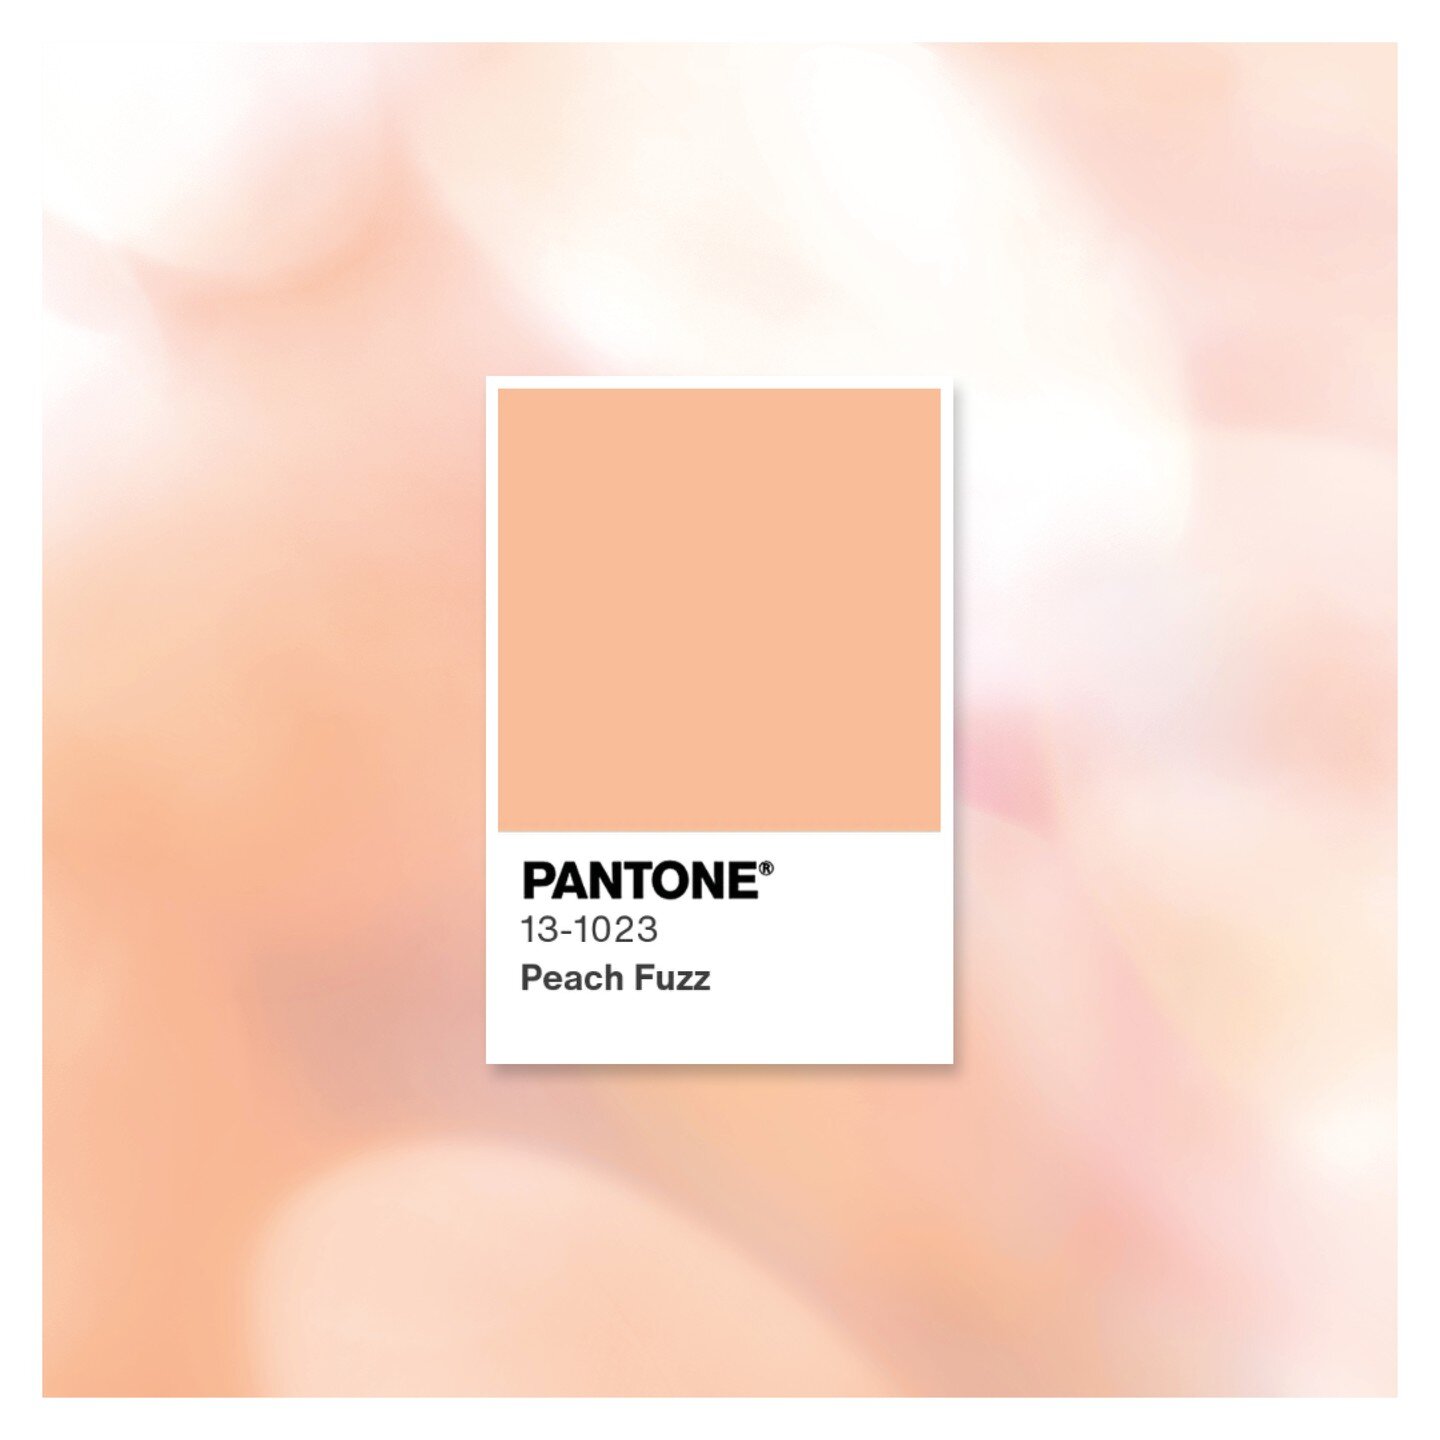 Peach Fuzz is the Pantone Colour of the Year 2024. What are your thoughts? 🍑